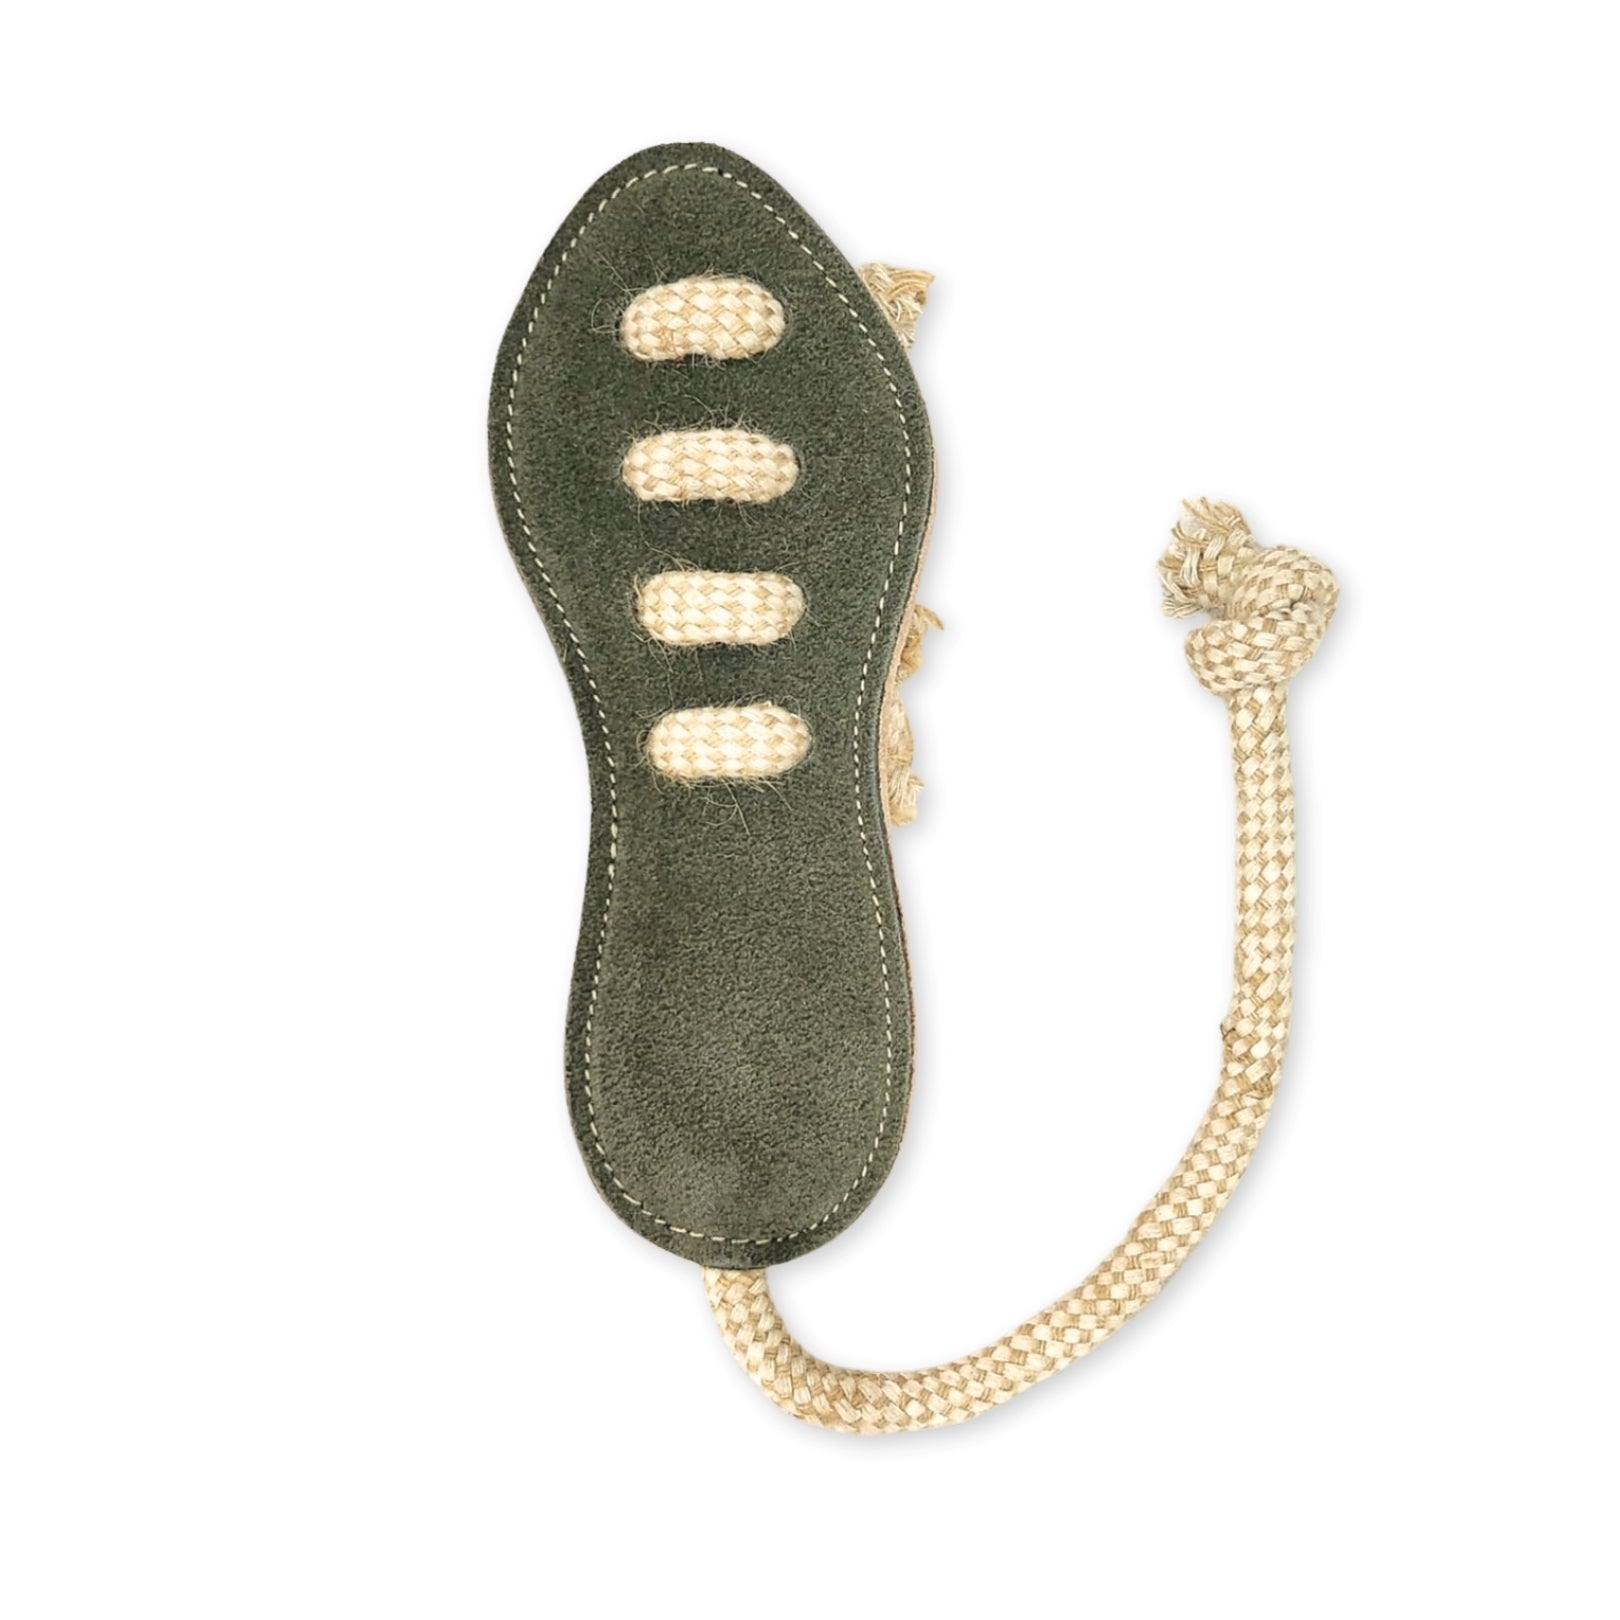 A Footy Boot - chive by Georgie Paws with pre-cut holes and a beige rope, designed for crafting a handmade espadrille shoe, isolated on a white background.